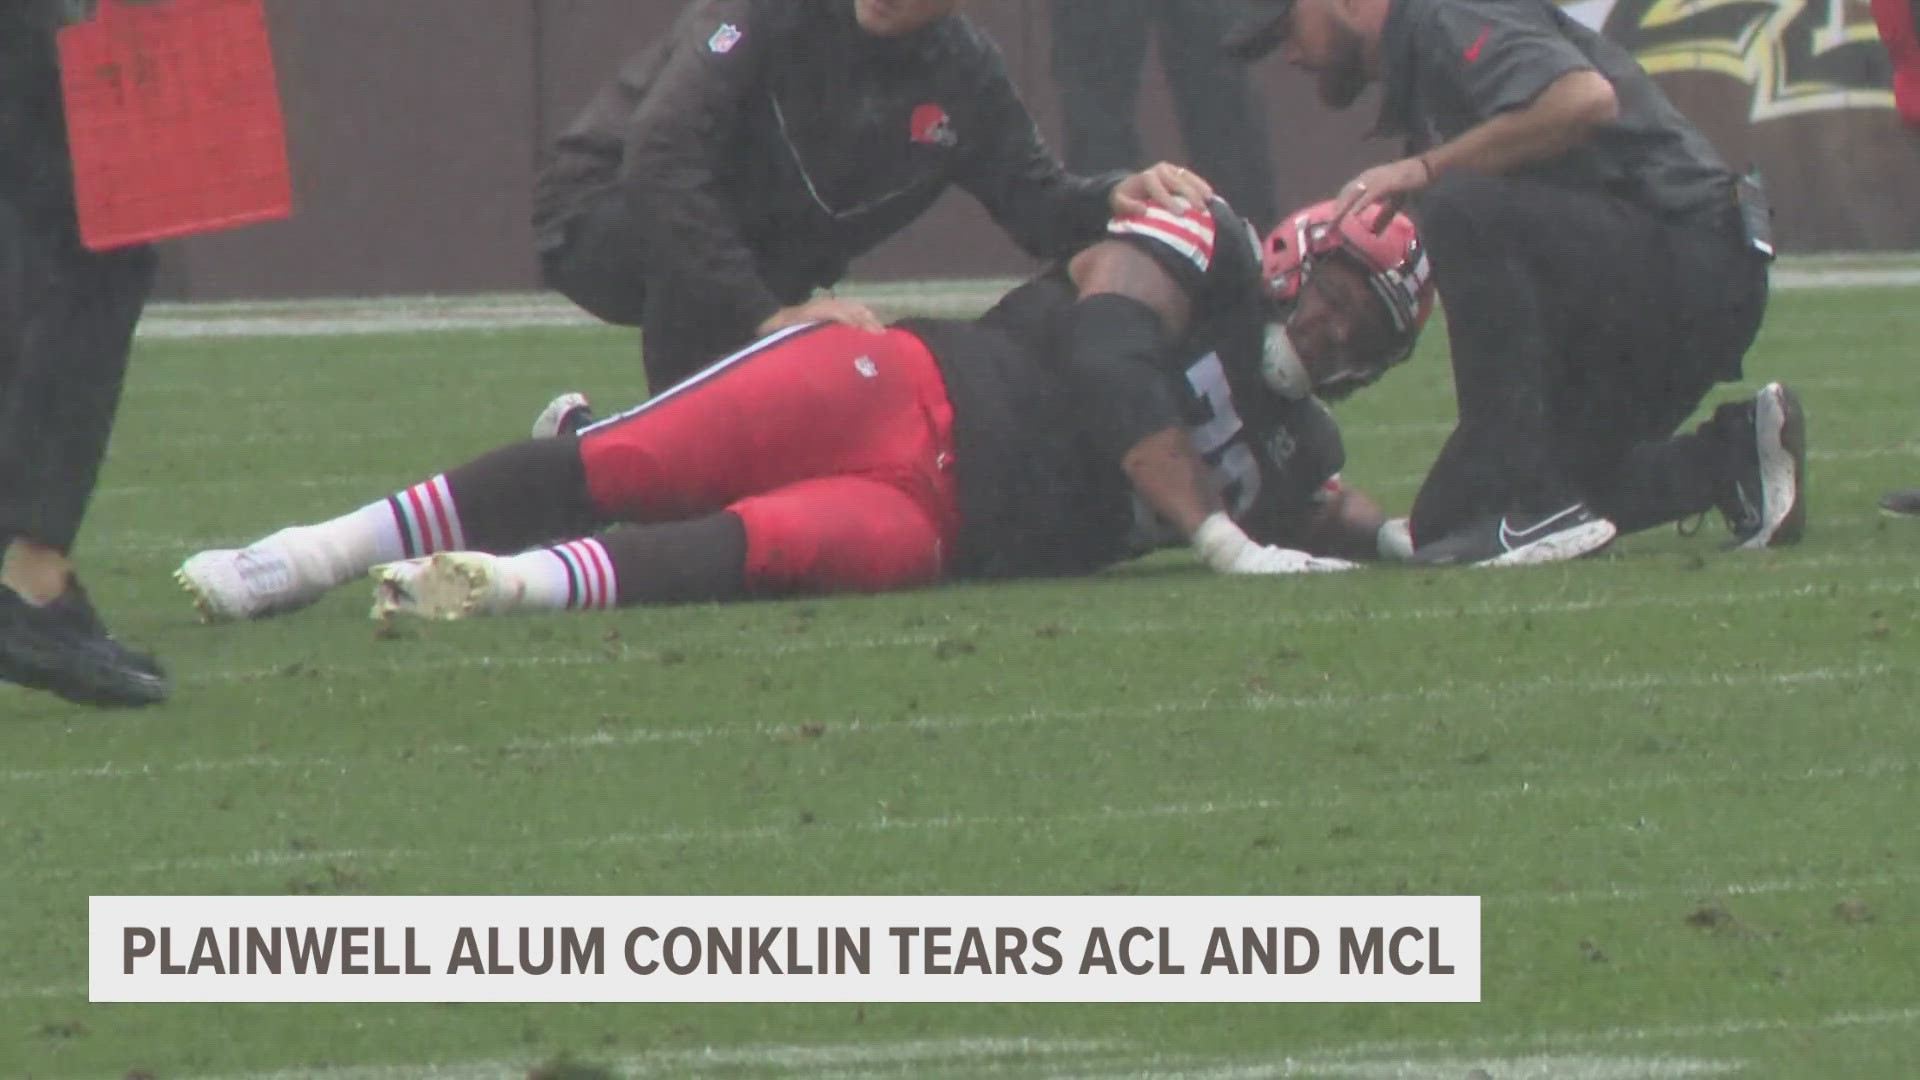 Plainwell high school alum Jack Conklin tore his ACL and MCL playing for Cleveland against Cincinnati.